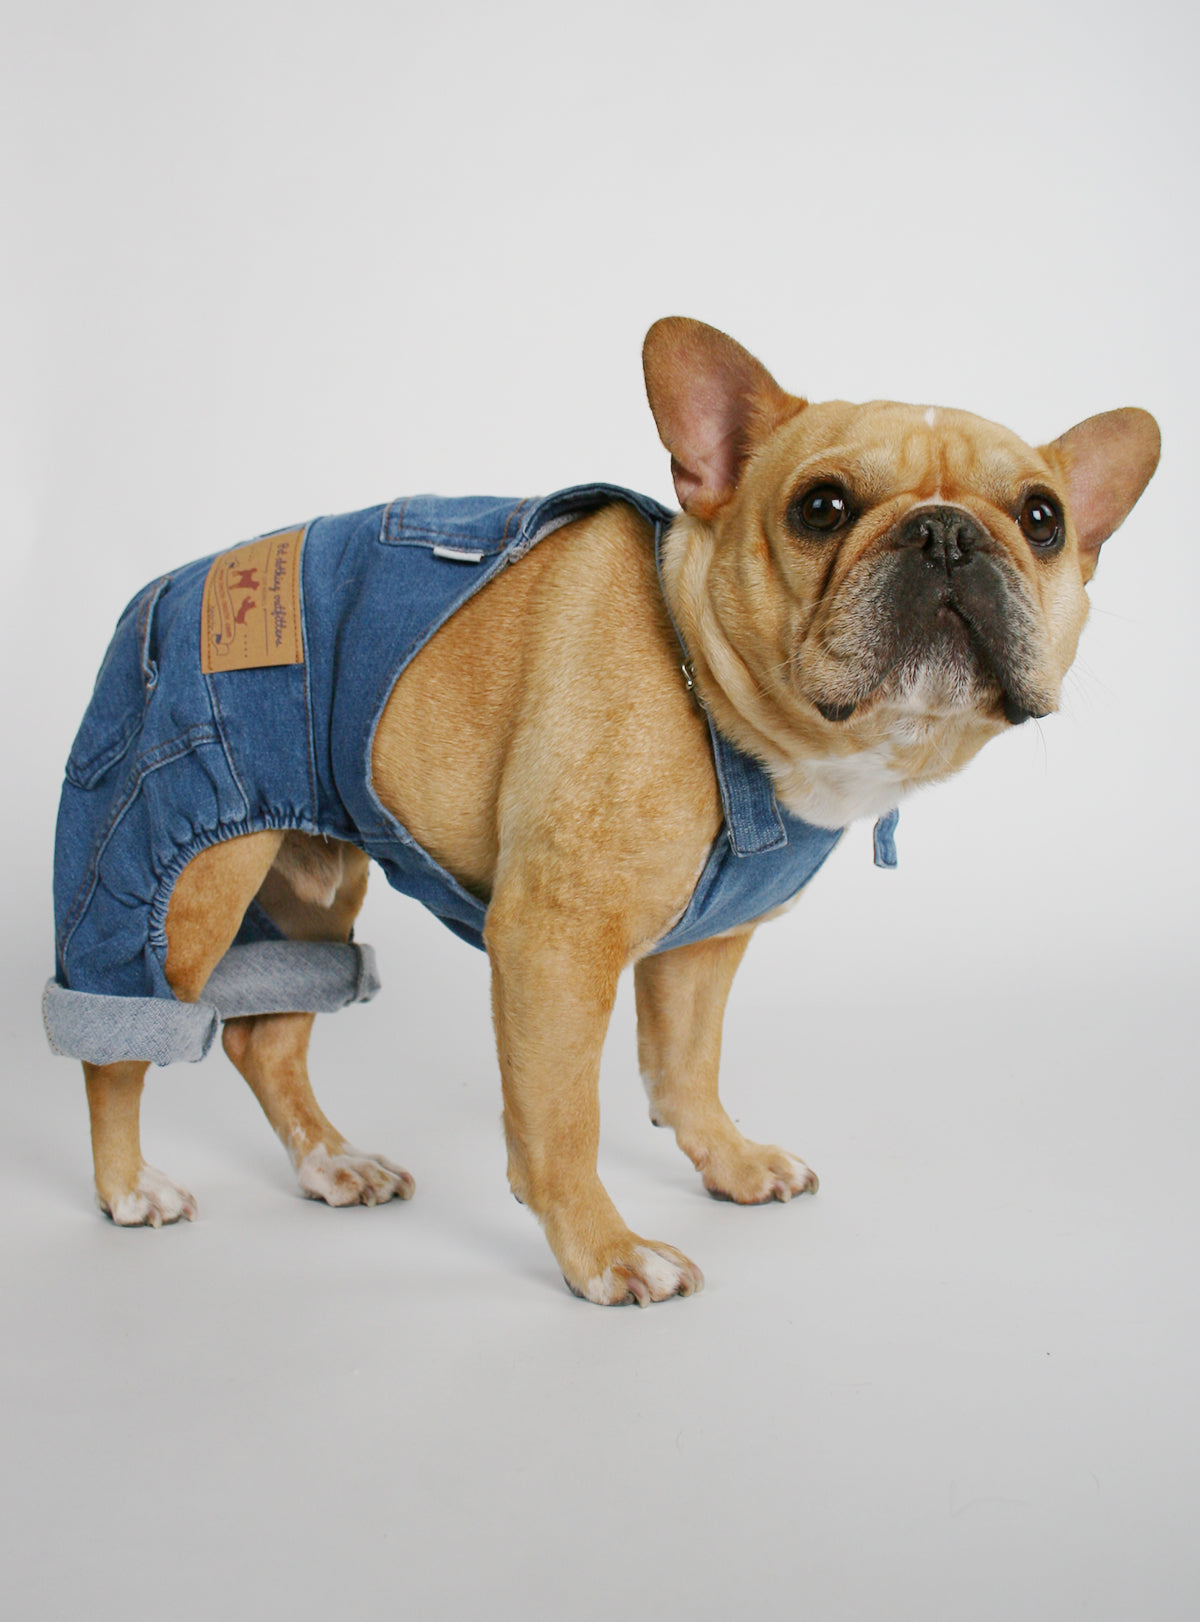 Amazon.com : CAISANG Dog Shirts Clothes Dog Denim Overalls, Fashion Pet  Jean Overalls Apparel, Comfortable Puppy Costumes for Small Medium  Dogs&Cat, Dog Denim Shirts, Shirt & Pant Sets, Pets Outfits (XXL) :